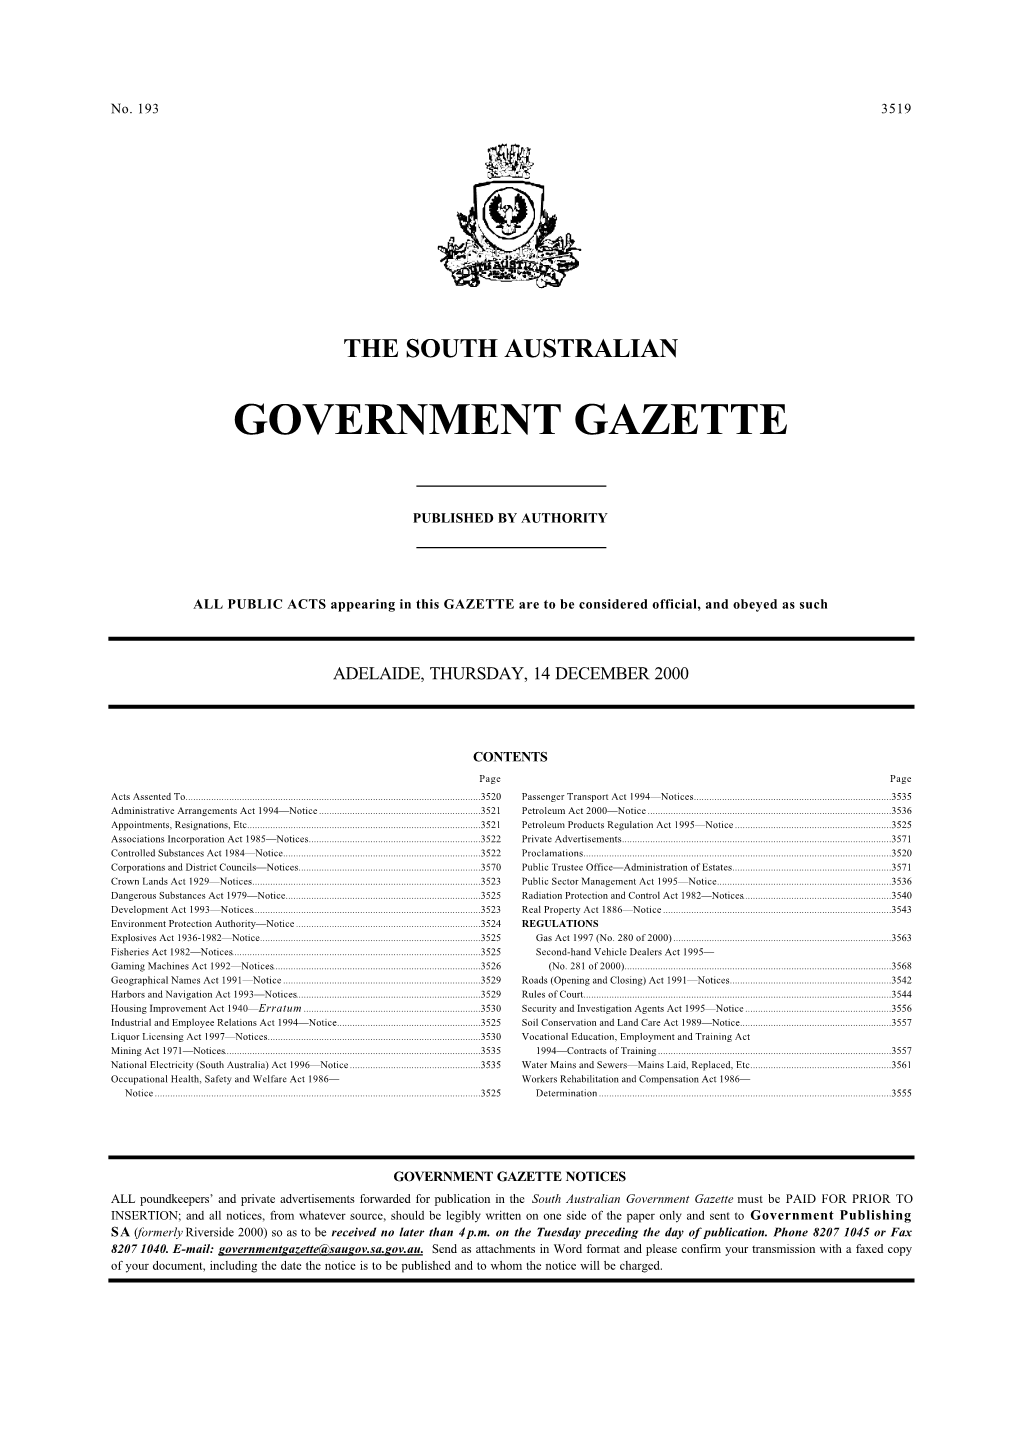 Government Publishing SA (Formerly Riverside 2000) So As to Be Received No Later Than 4 P.M